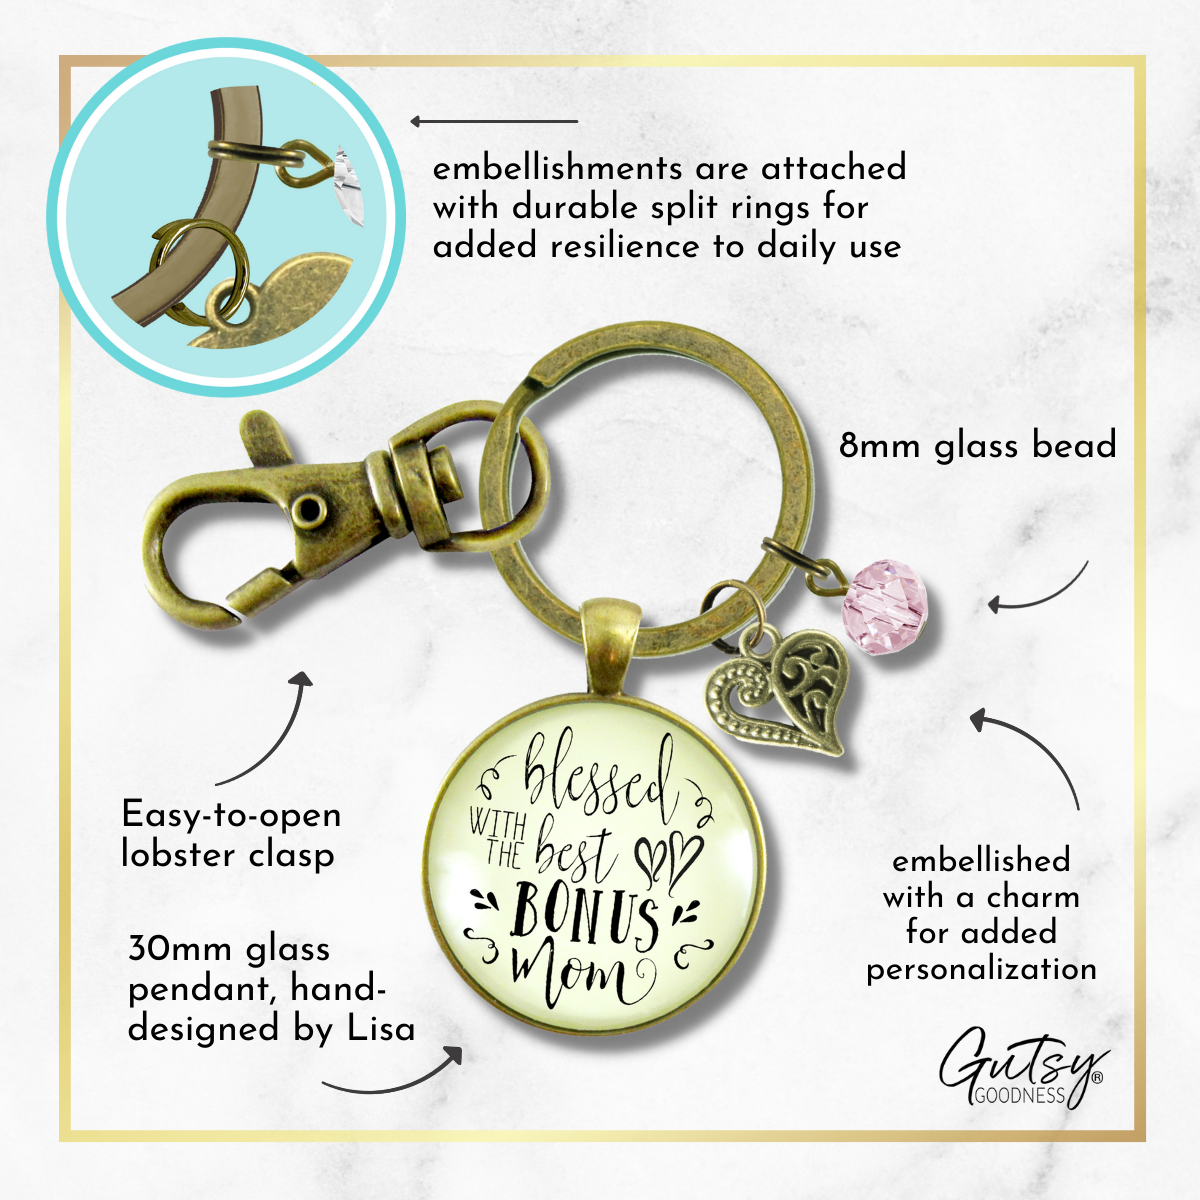 Blessed With Best Bonus Mom Keychain Thank You Mother Womens Jewelry Gift - Gutsy Goodness Handmade Jewelry;Blessed With Best Bonus Mom Keychain Thank You Mother Womens Jewelry Gift - Gutsy Goodness Handmade Jewelry Gifts